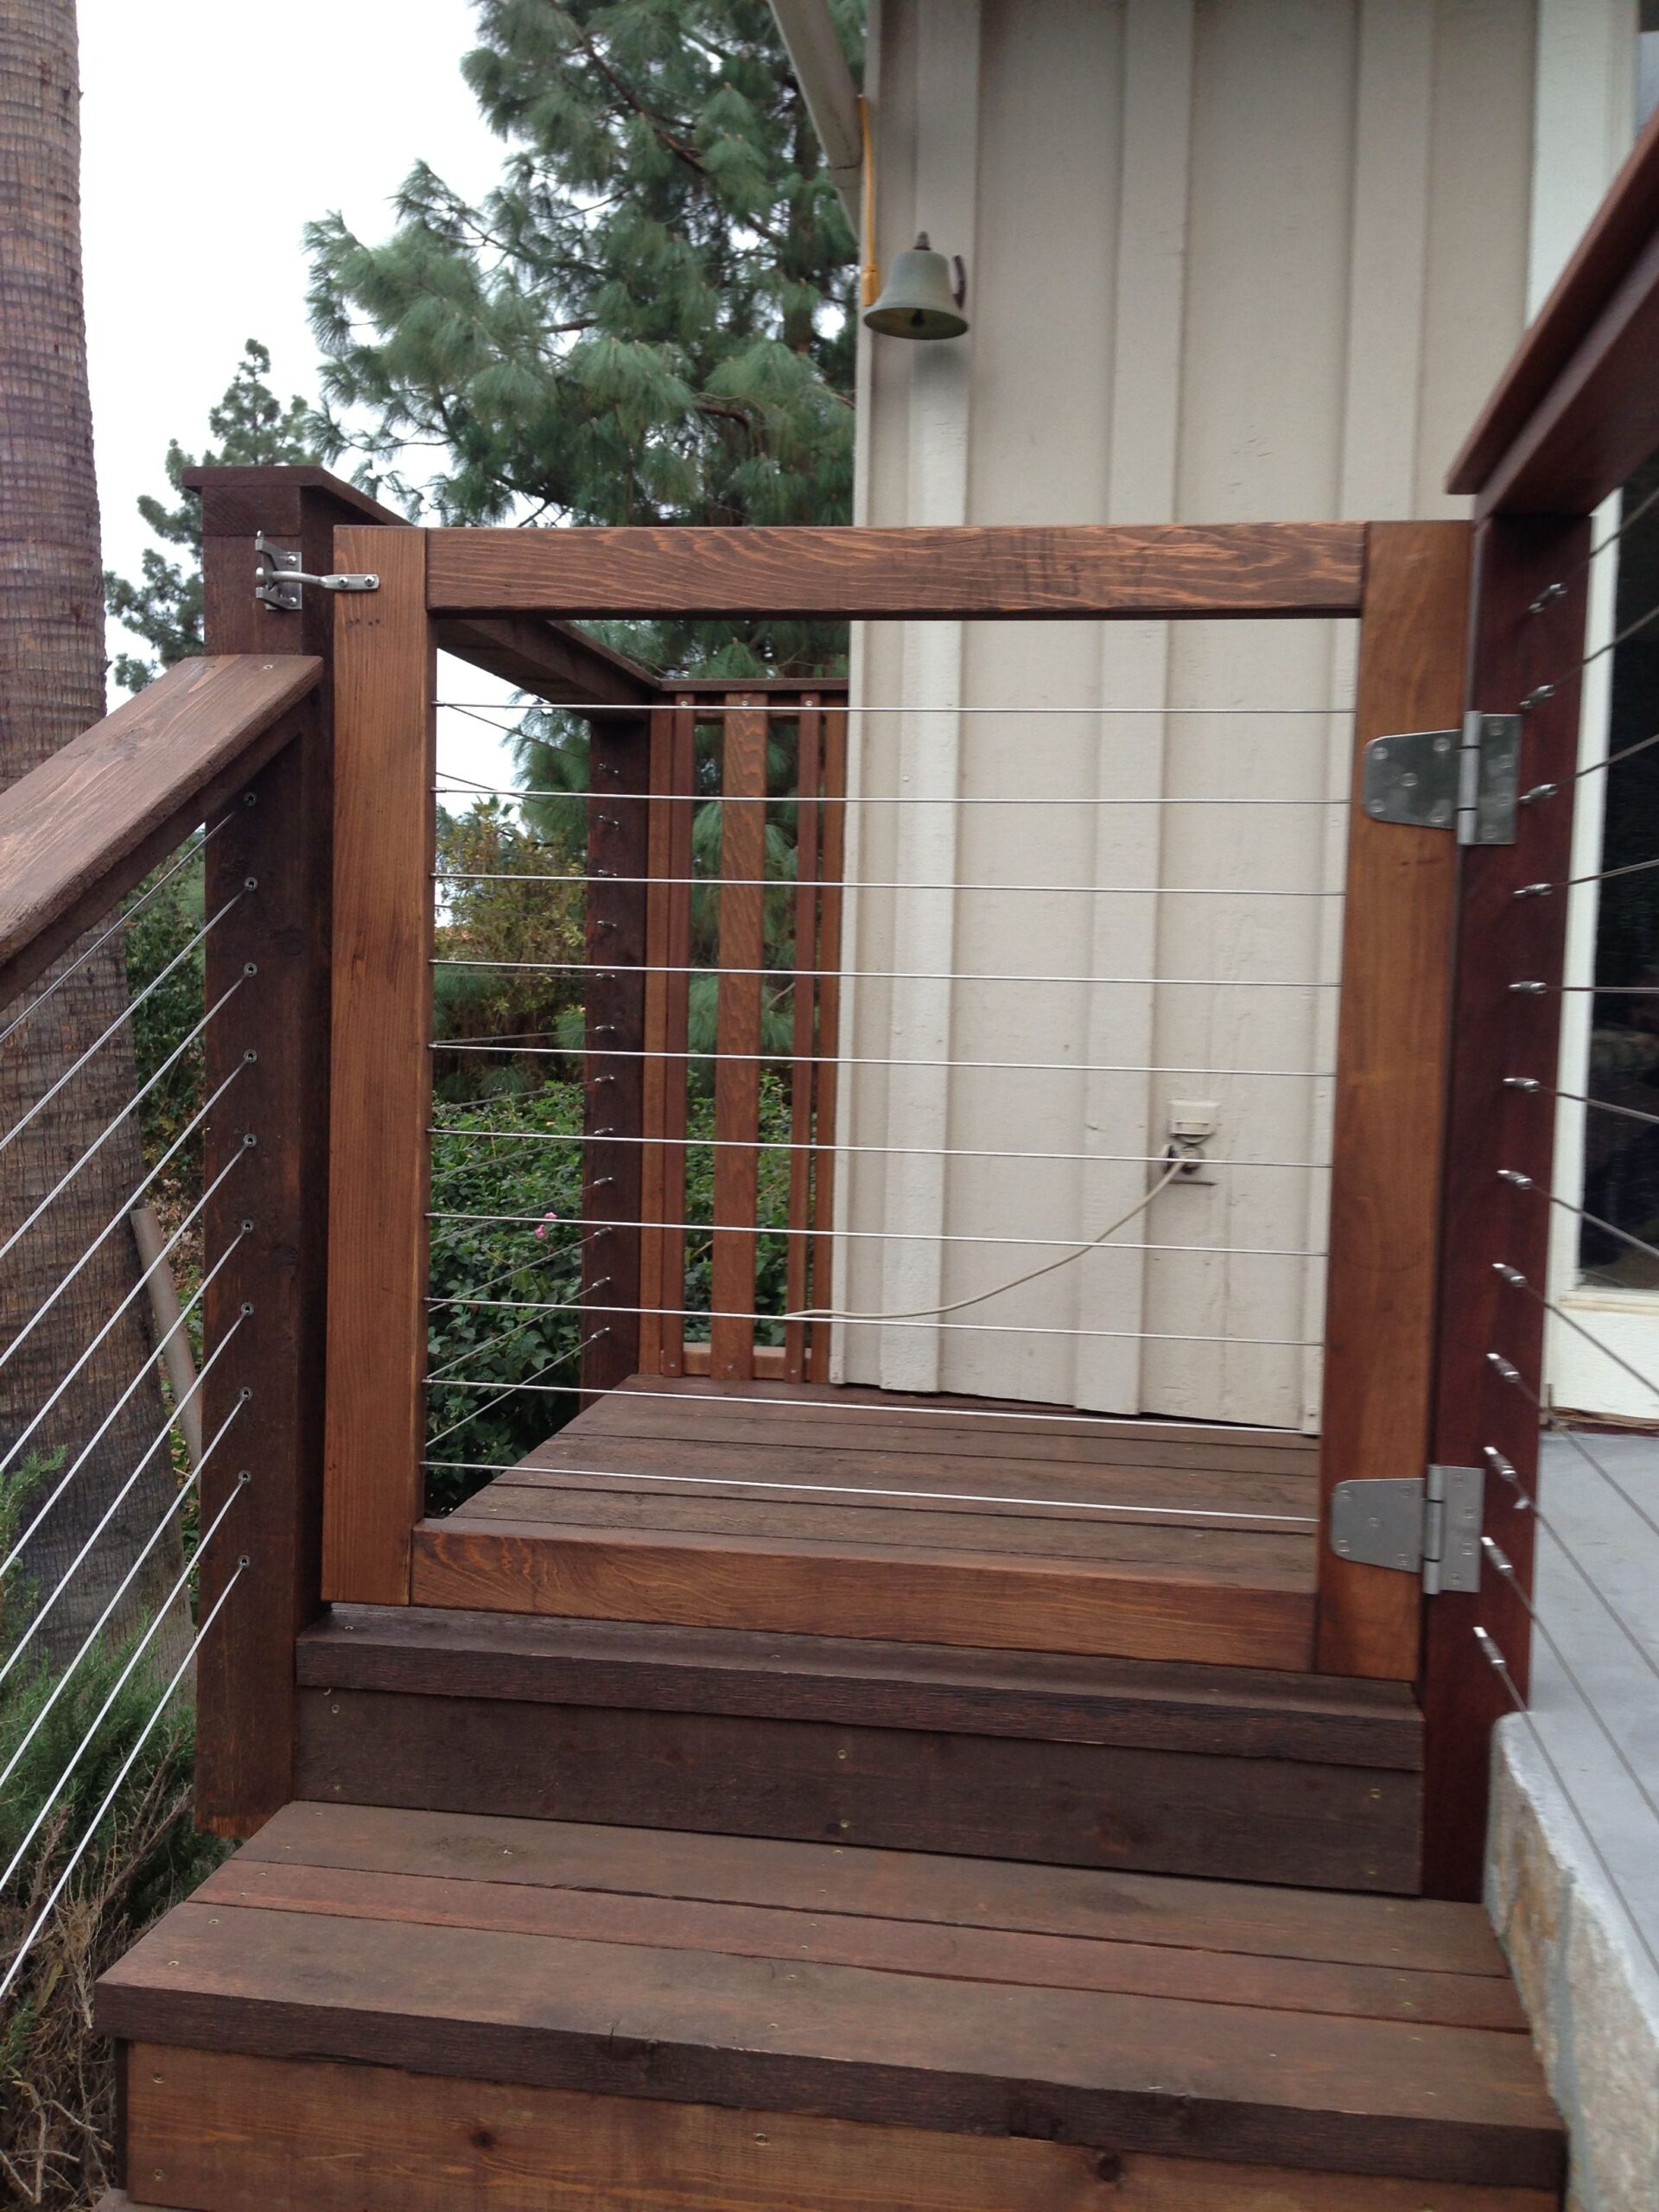 Elegant Deck Gates for a Stylish Outdoor
Look